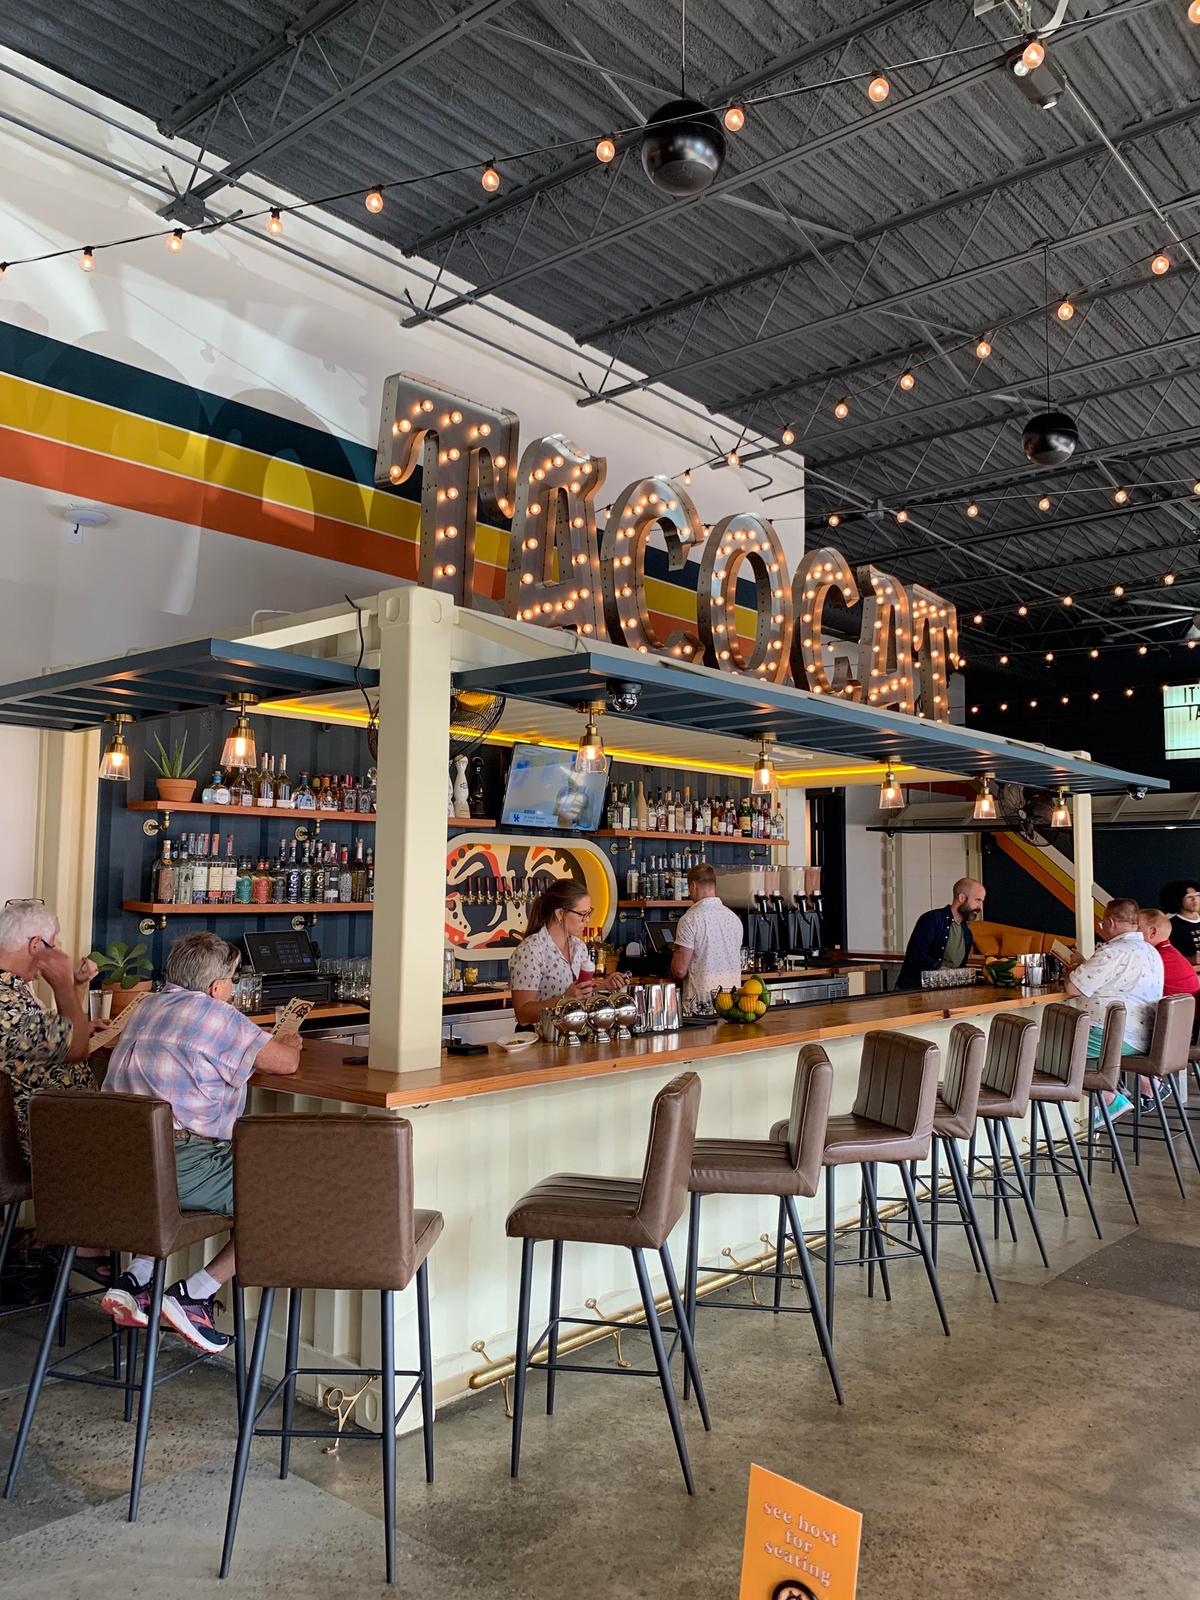 Tacocat, known for its offerings of unique tacos, is housed in an old carwash and is resplendent with colorful decor and original garage doors. Call it downtown hipster plus trendy, all in a casual atmosphere with good food. (Visit Augusta/TNS)